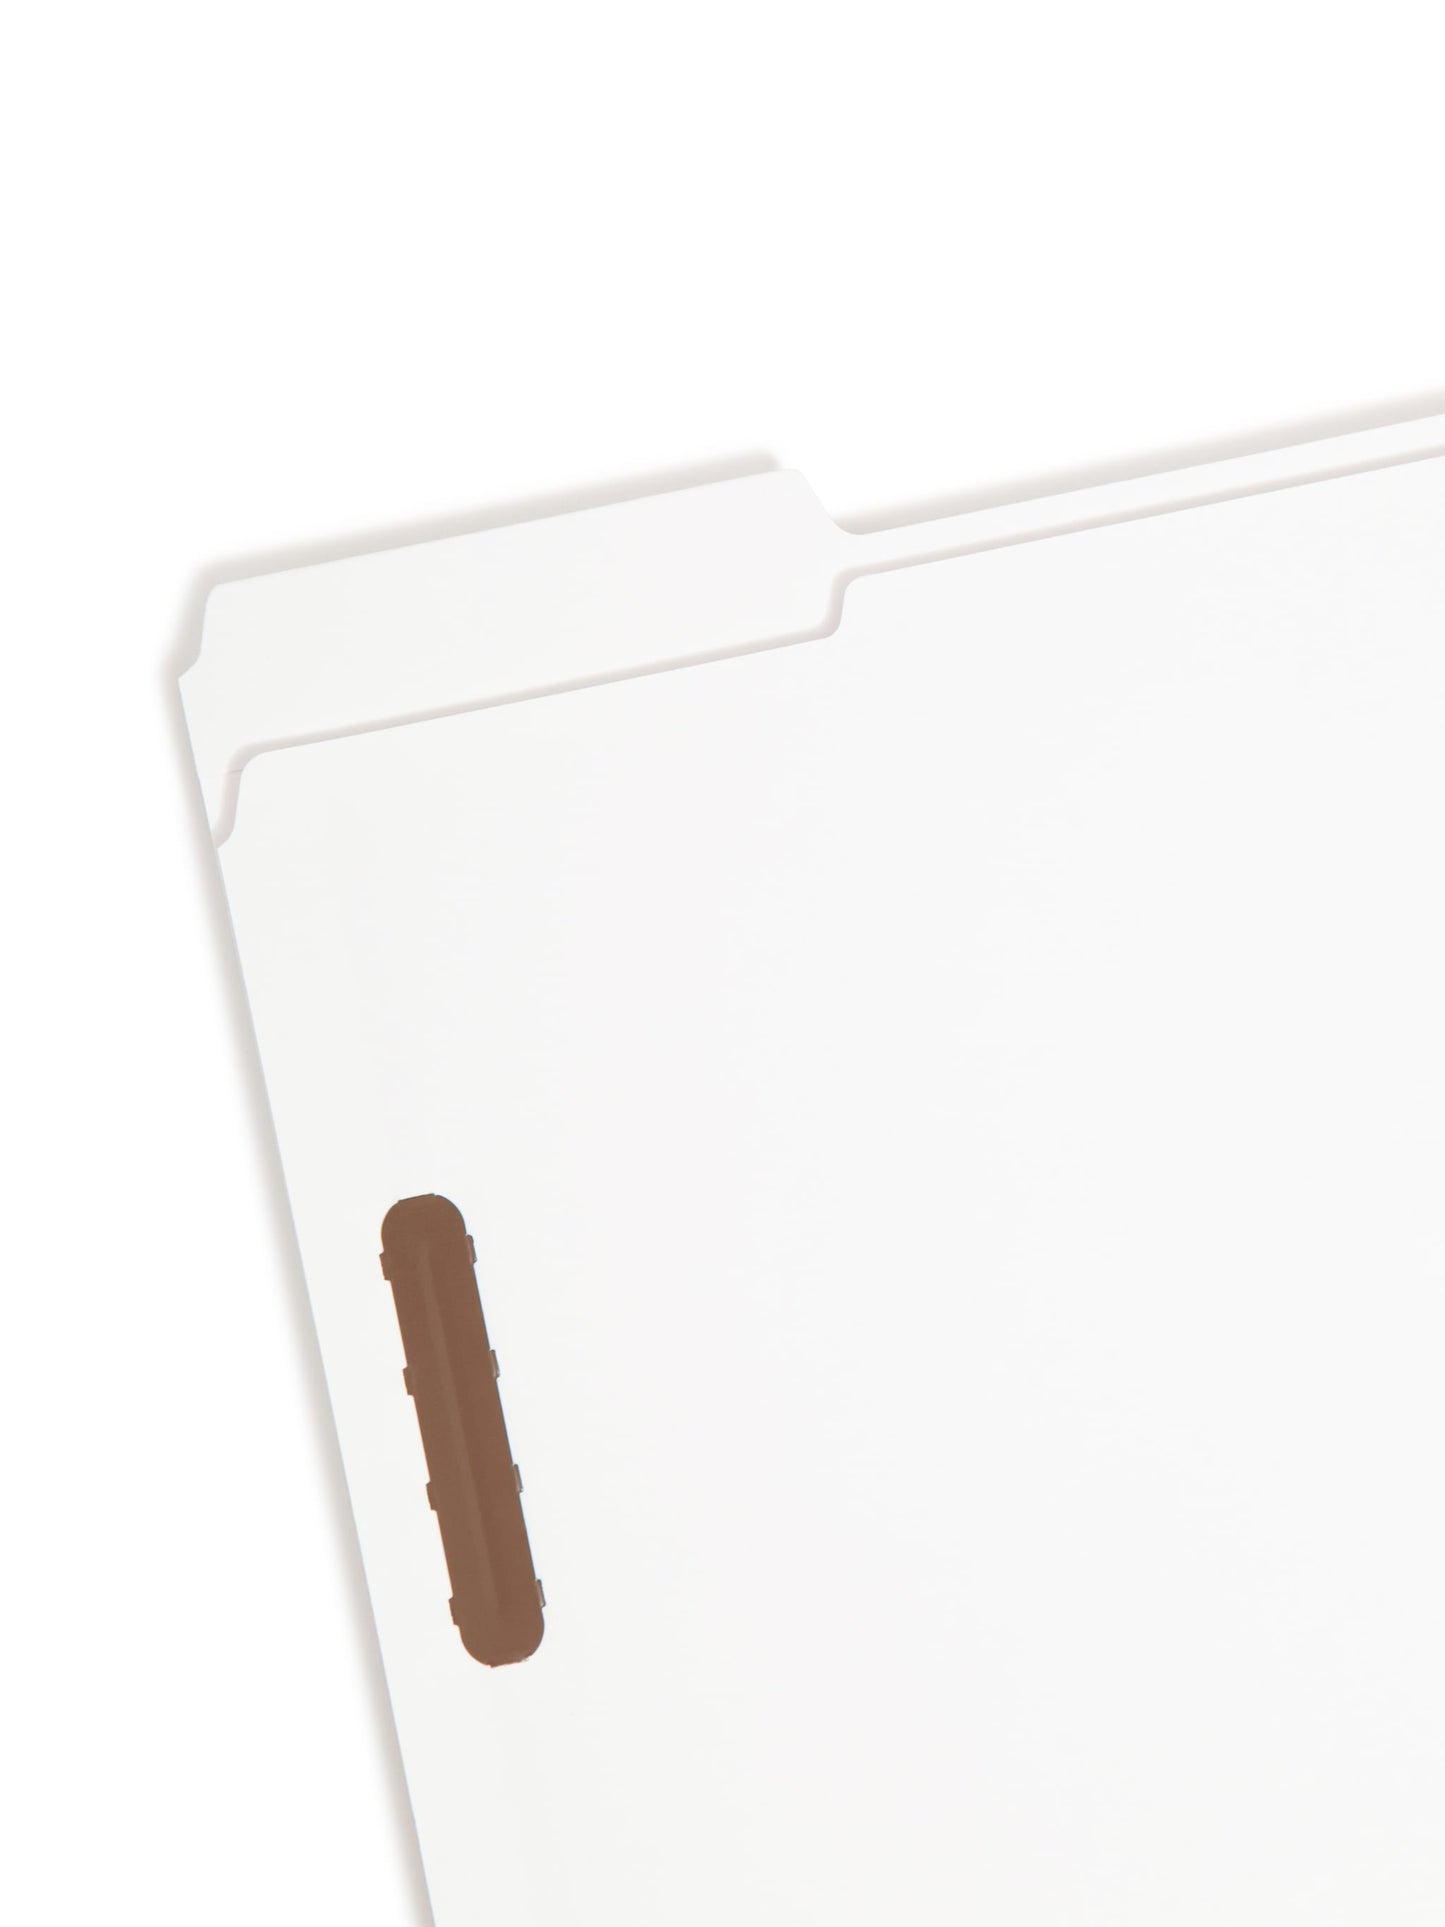 Reinforced Tab Fastener File Folders, 1/3-Cut Tab, 2 Fasteners, White Color, Letter Size, Set of 50, 086486128407